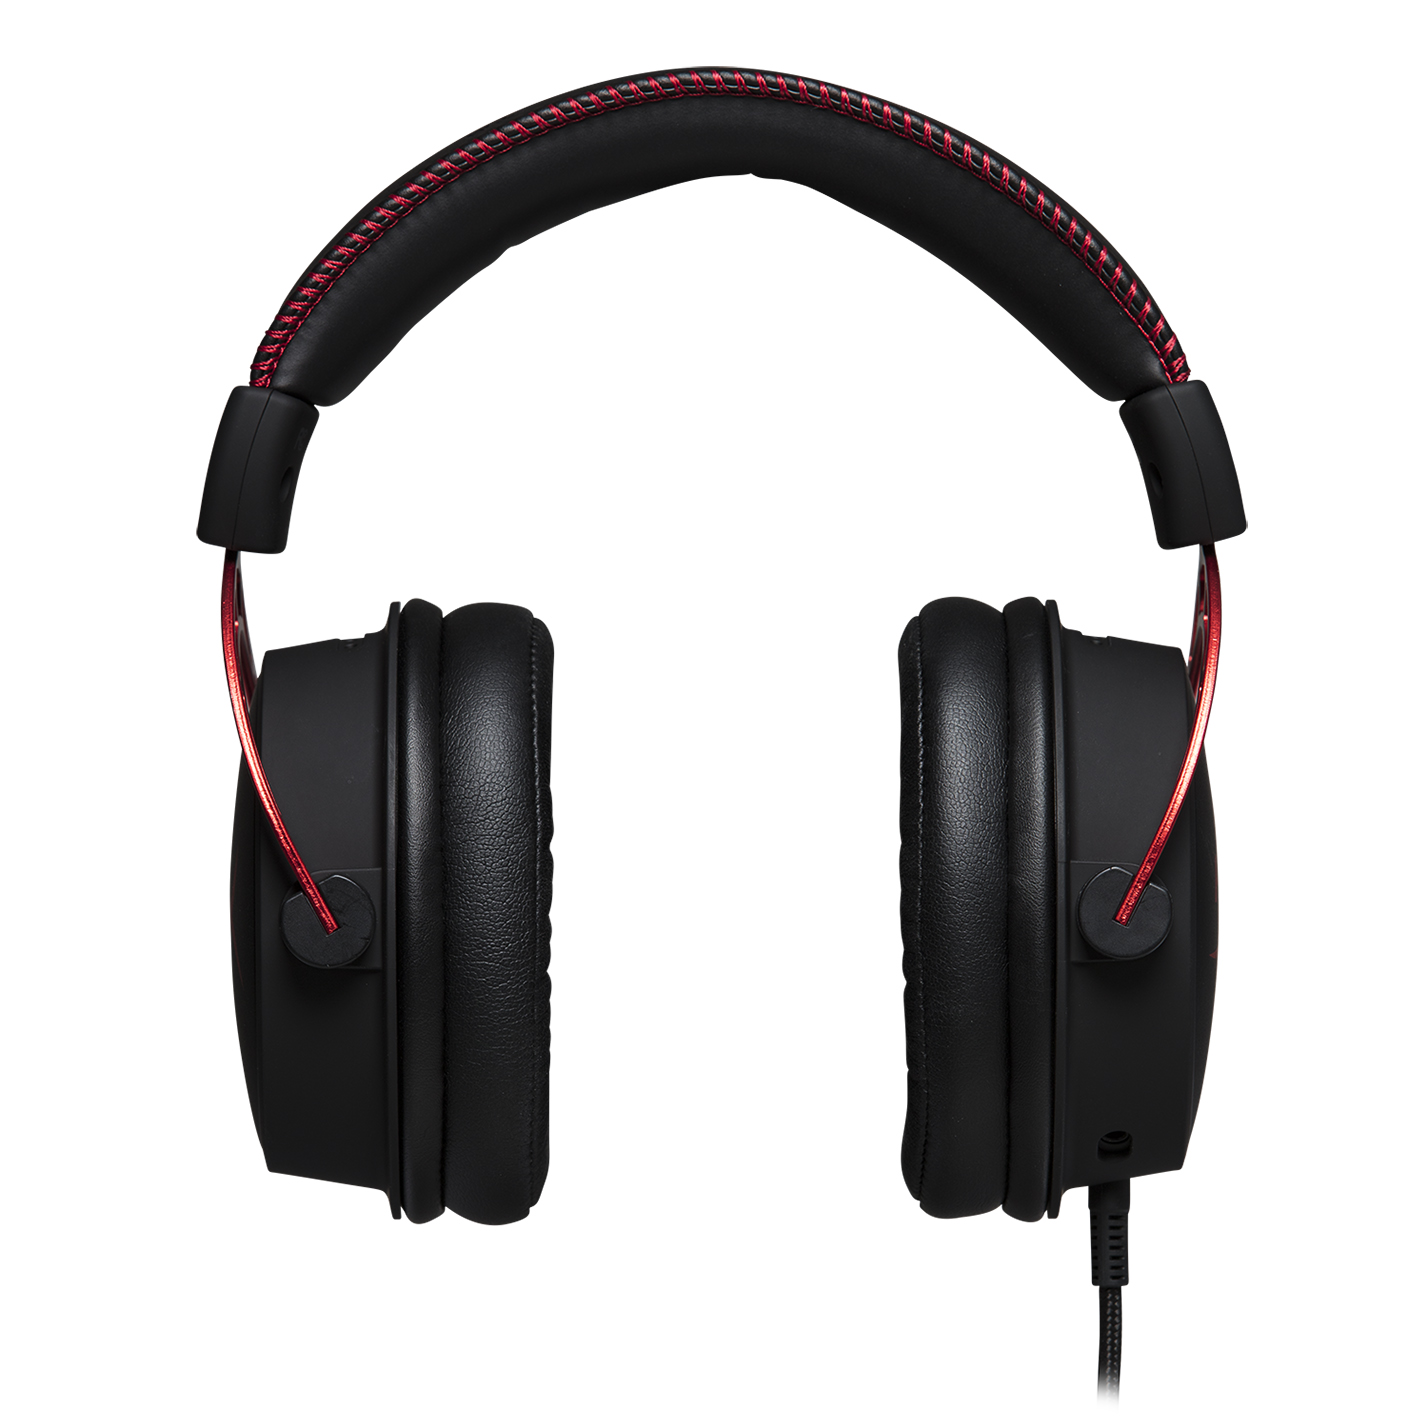 HyperXGaming headset from side view